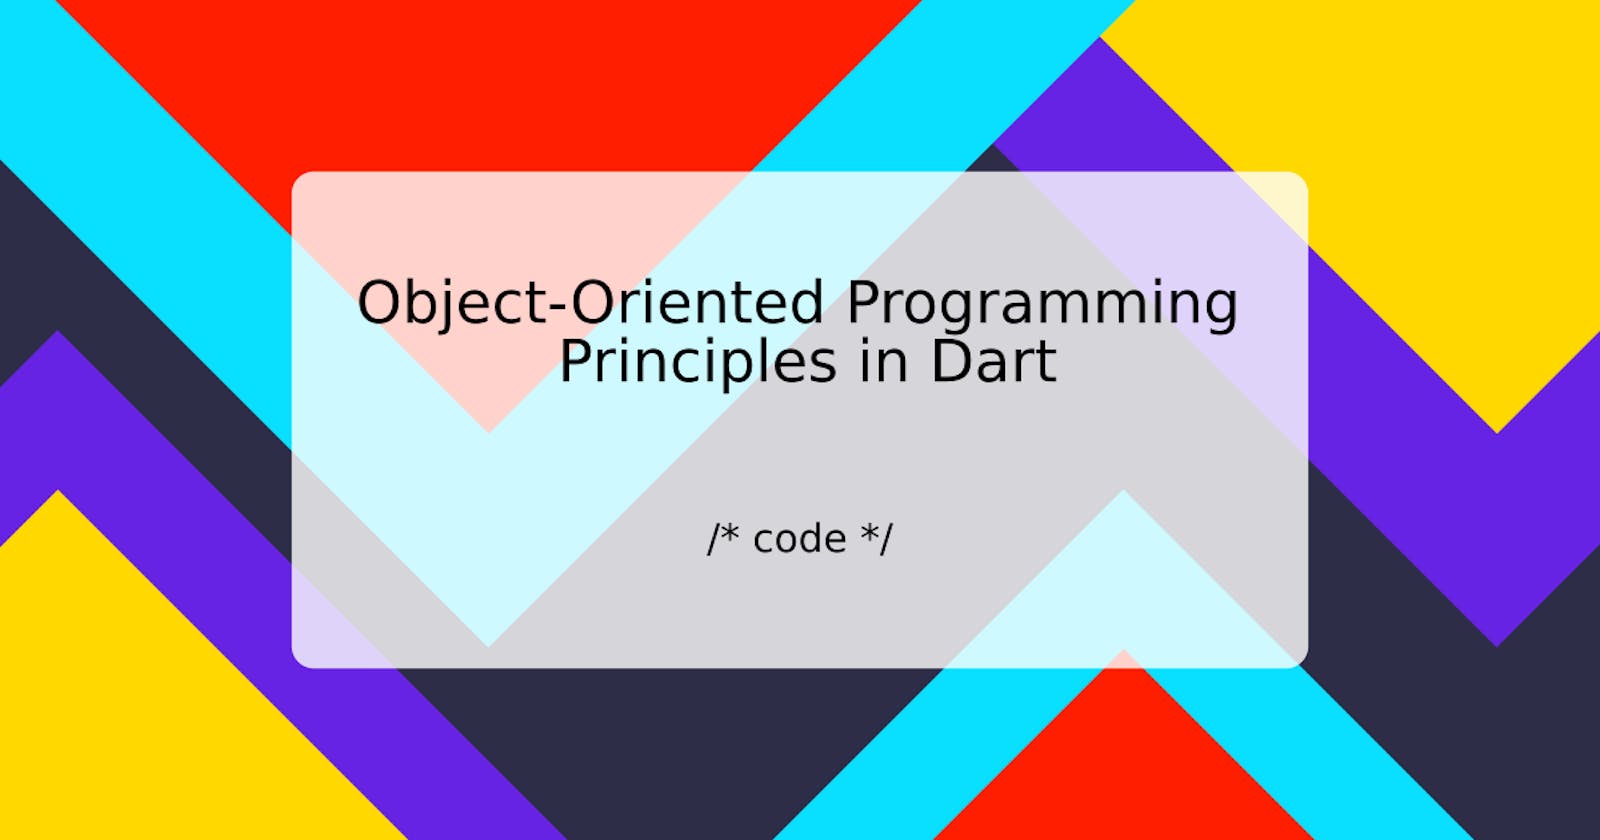 Object-Oriented Programming Principles in Dart